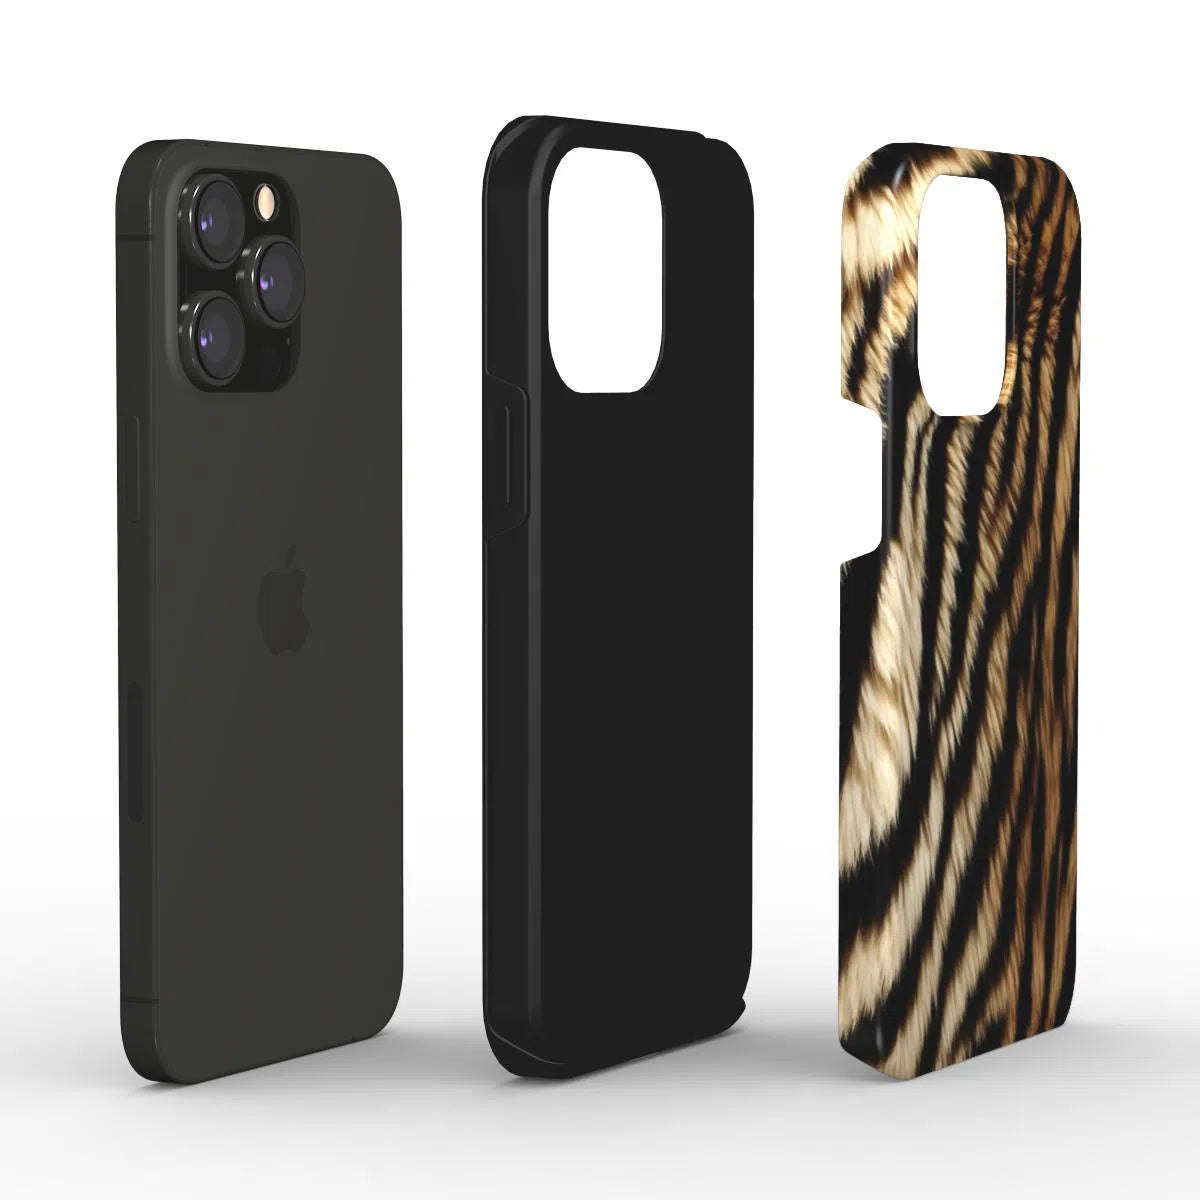 Faux Tiger Skin Tough Phone Case: Wild and Durable